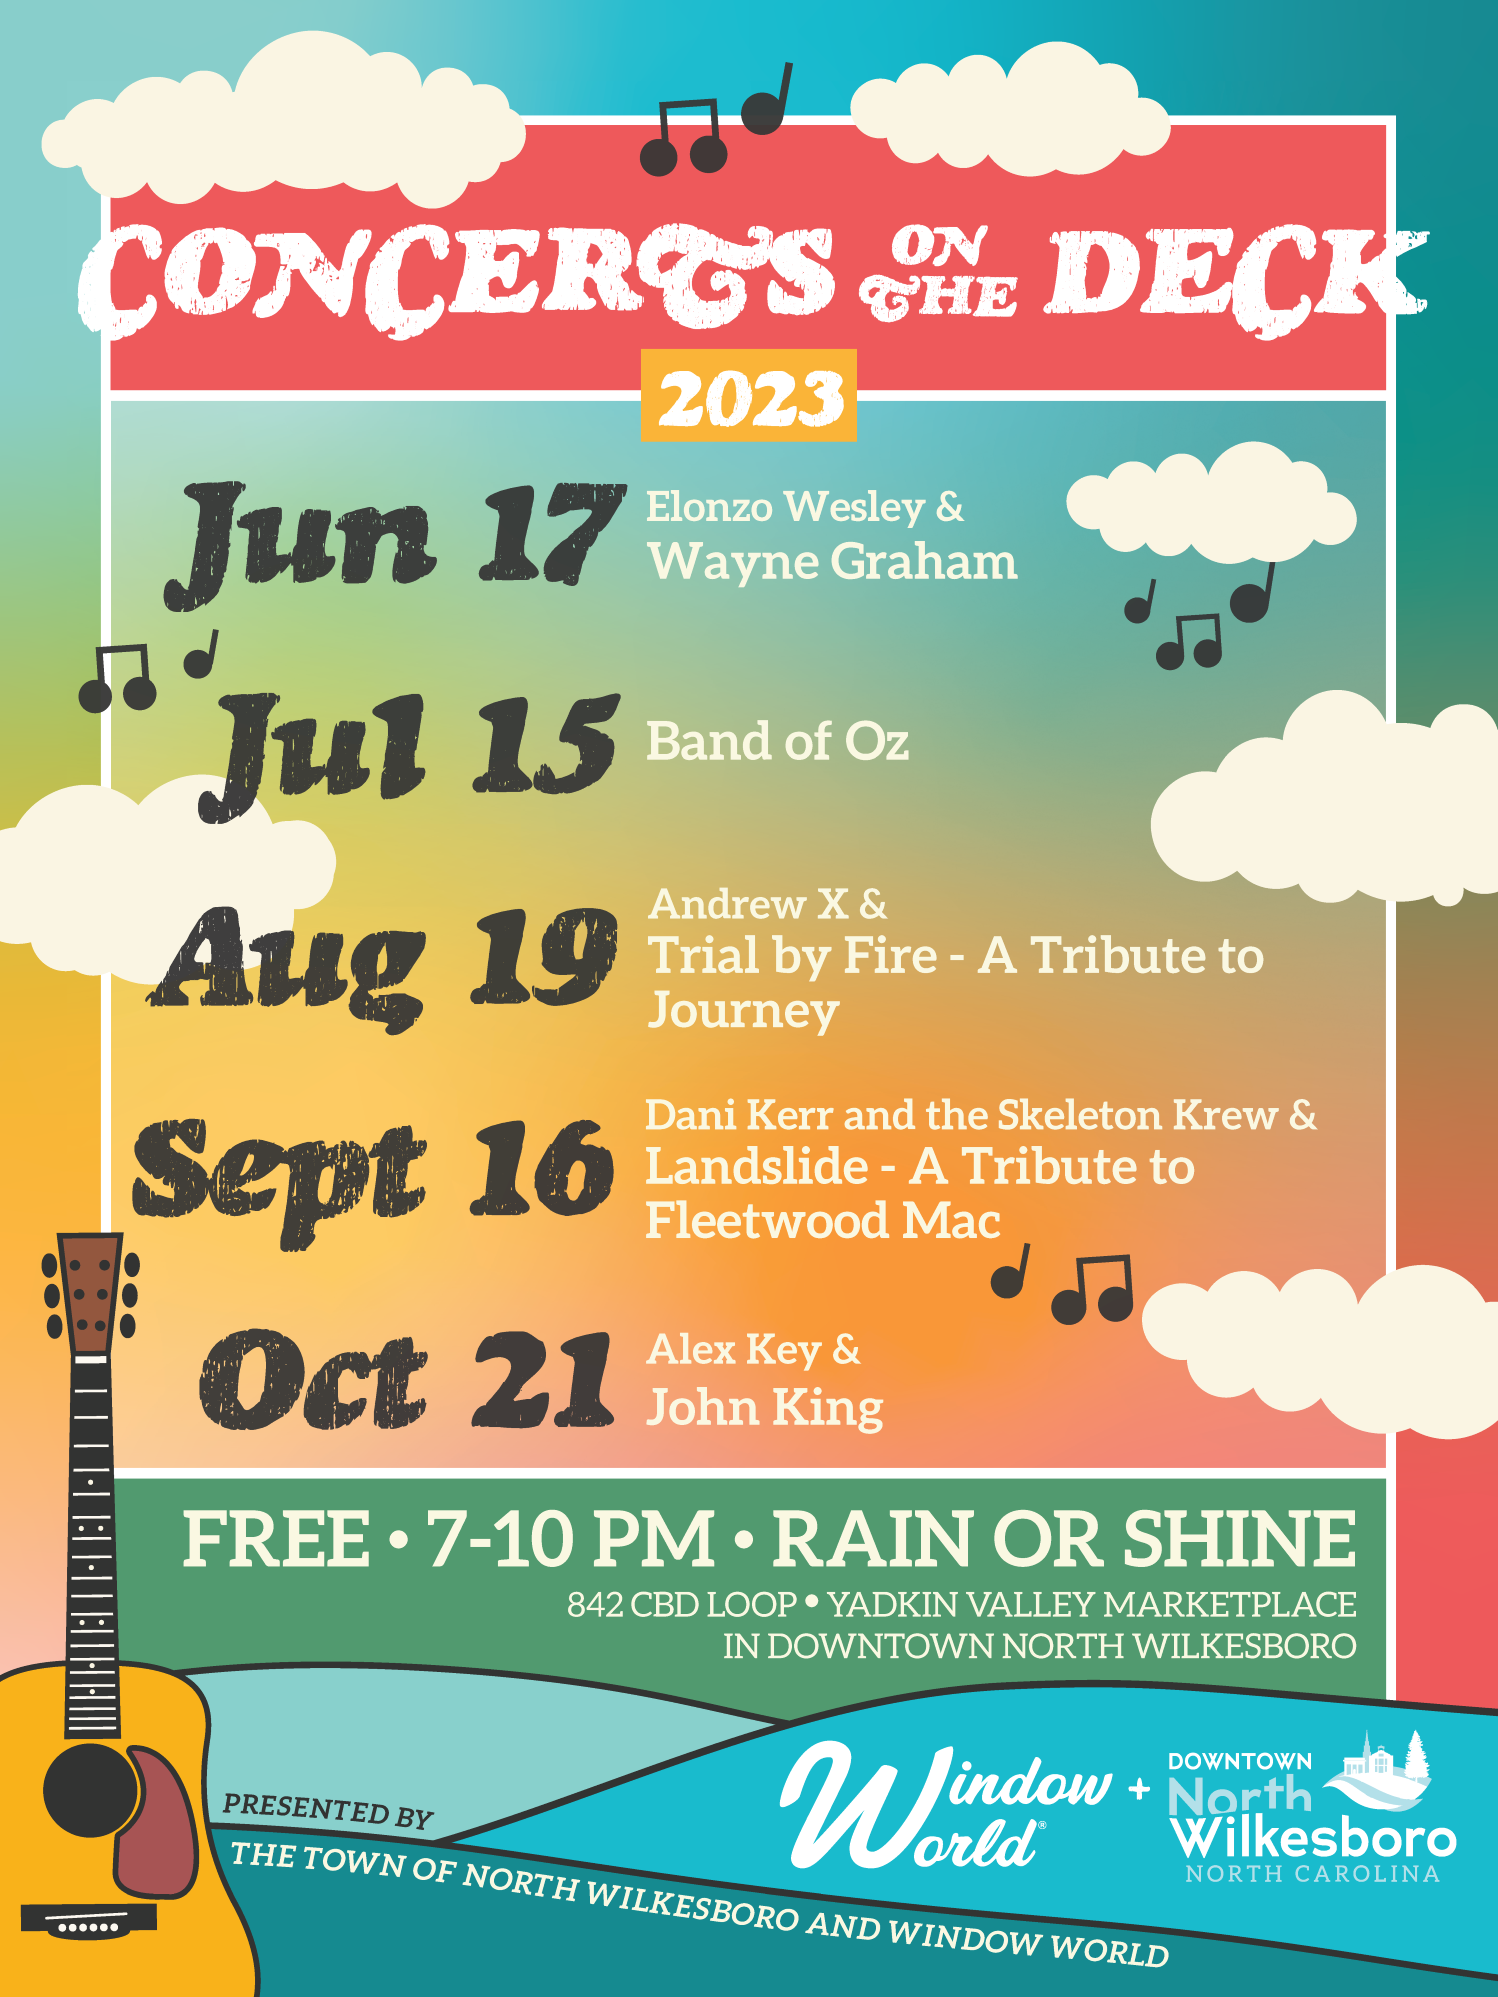 Downtown North Wilkesboro Concerts on the Deck